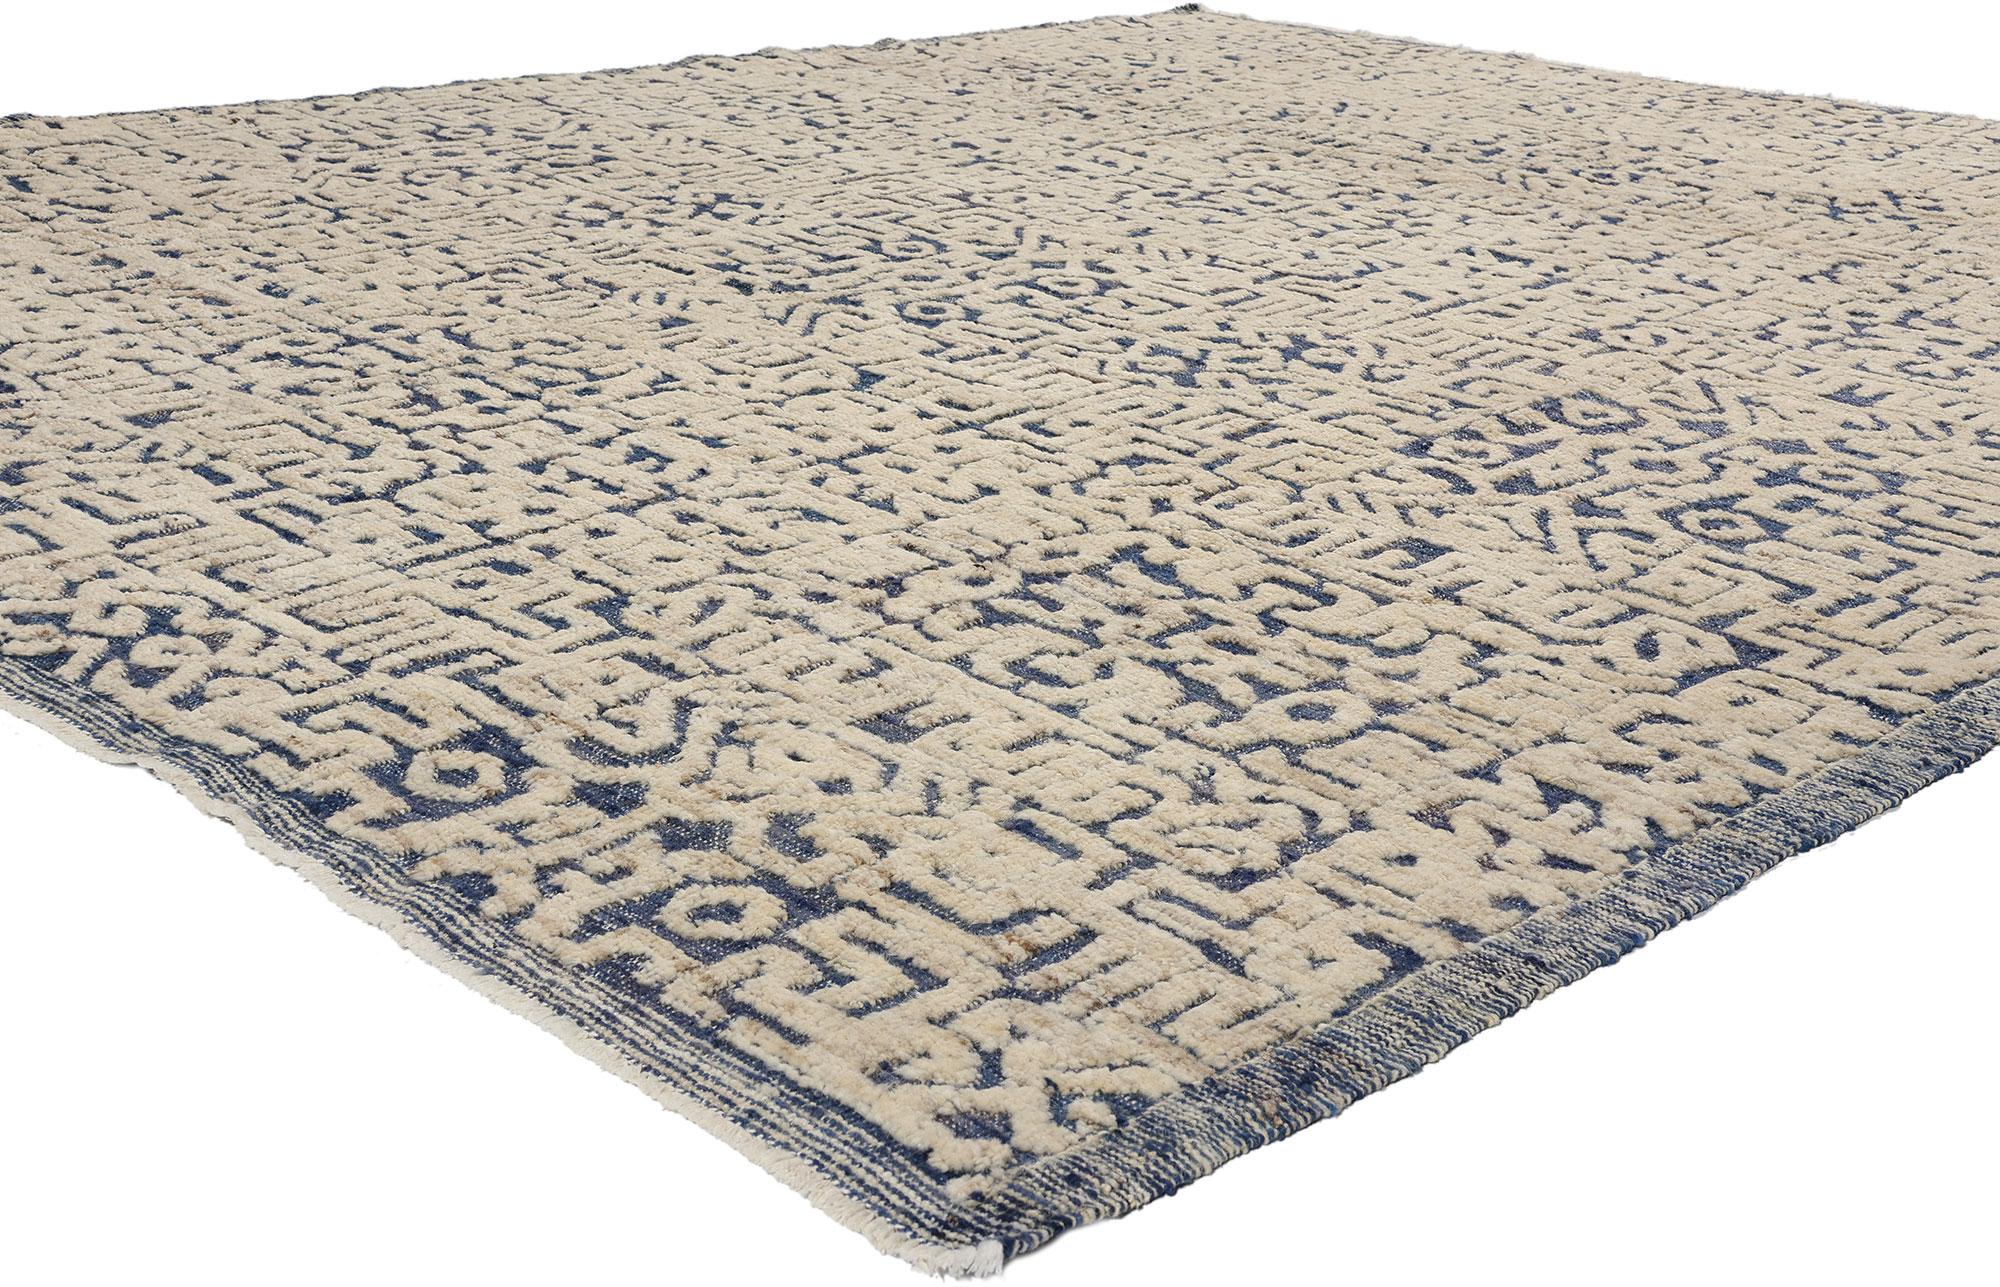 81055 Modern Geometric Moroccan High-Low Rug, 08'02 x 09'11. Introducing a mesmerizing fusion of cultural heritage and artisanal craftsmanship, this Moroccan high-low wool pile rug unveils an exquisite tableau of design influences. Drawing